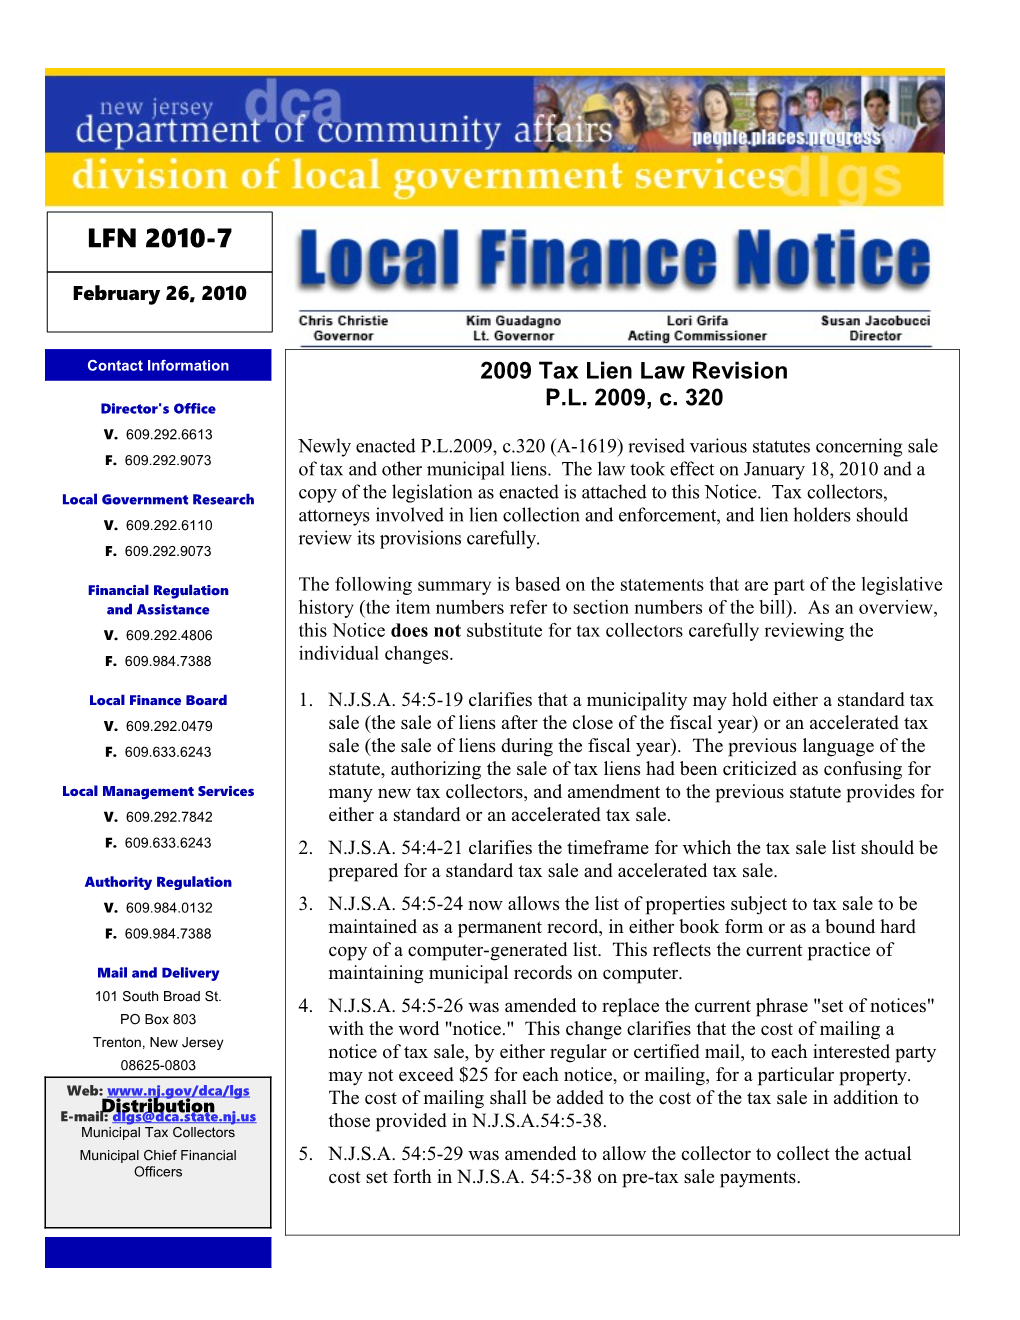 Local Finance Notice 2010-7February 26, 2010Page 1